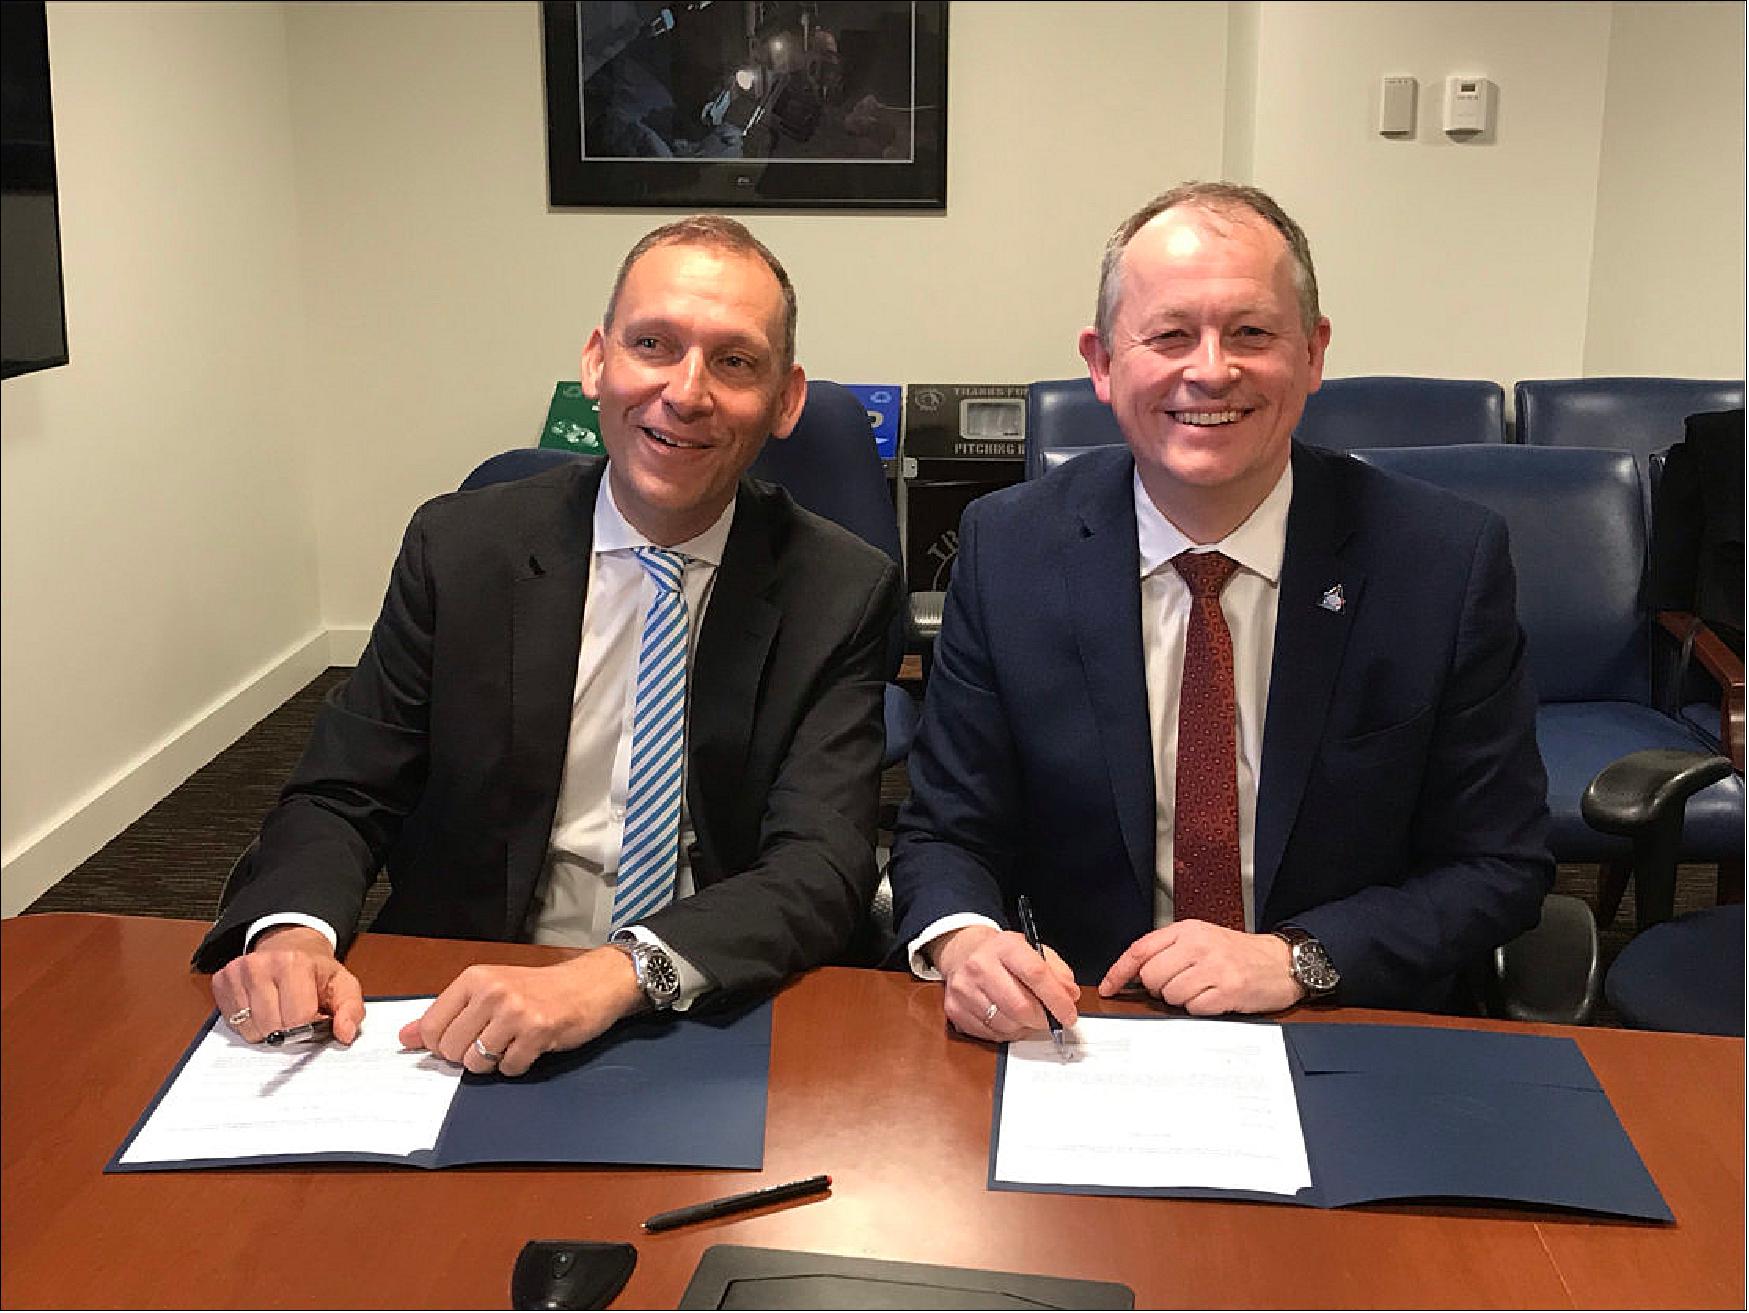 Figure 56: Thomas Zurbuchen, NASA’s Associate Administrator for the Science Mission Directorate (left), and David Parker, ESA’s Director of Human and Robotic Exploration, signing a Statement of Intent to coordinate joint science research about the Moon and identify cooperative lunar mission opportunities during the National Academies’ Space Science Week in Washington, DC, USA, on 27 March 2019. The statement highlights a common interest in accessing the Moon driven by scientific discovery and support for private-sector capabilities and mission services on the surface and in the vicinity of the Moon (image credit: ESA, M. Tabache)